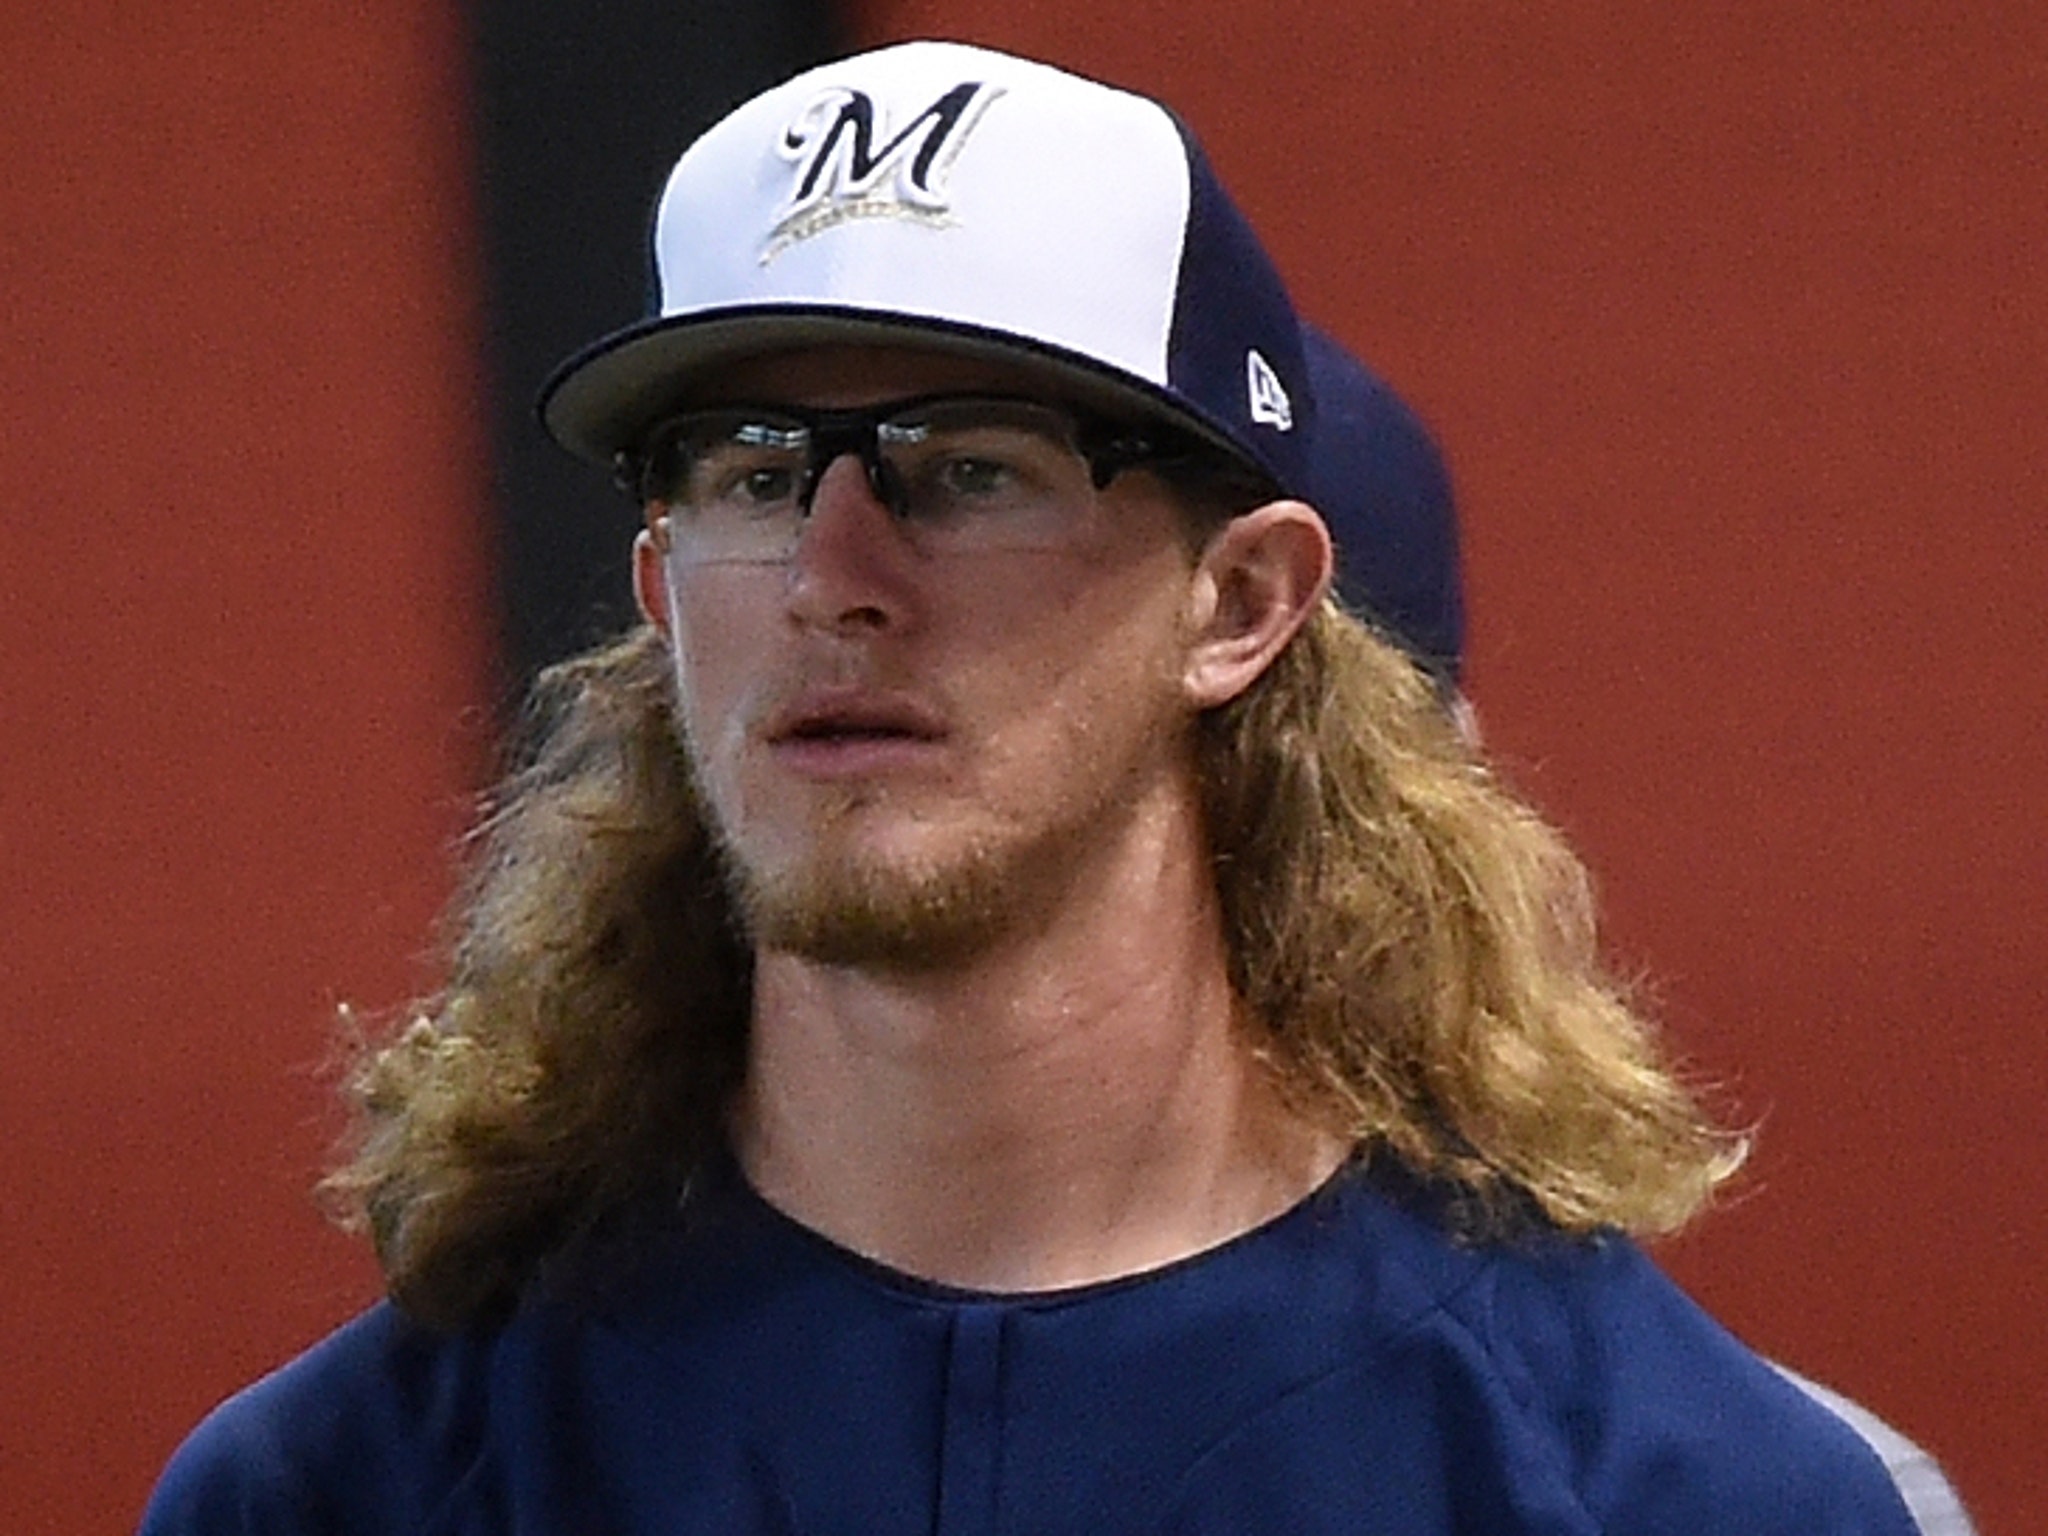 Josh Hader Apologizes, Won't Be Suspended for Racist Tweets